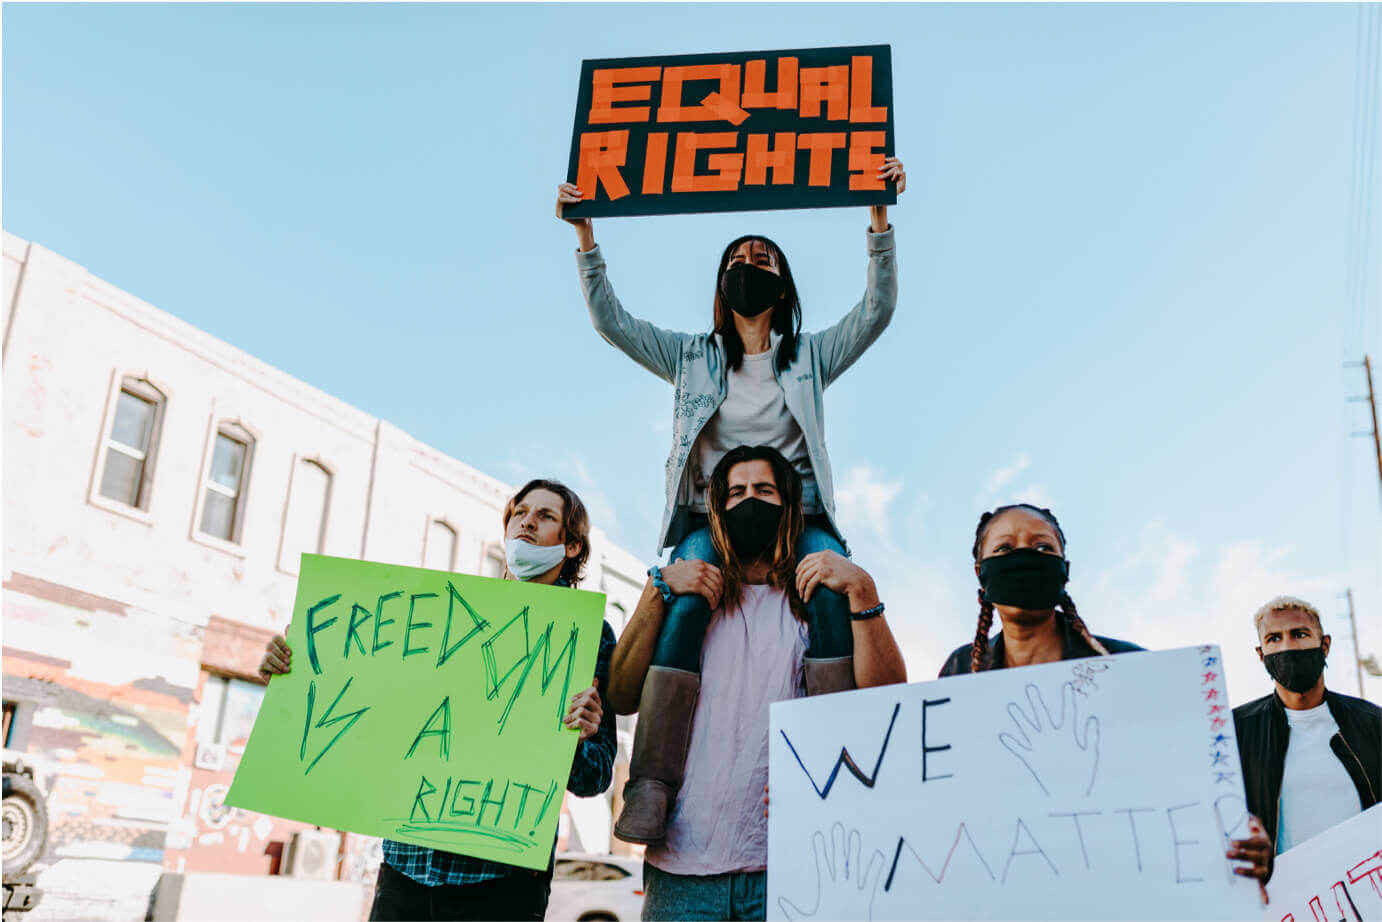 A photo taken at a protest; four people wearing medical masks, three of them holding signs. From left to right: a man holding a green handwritten Freedom is a human right sign; a woman sitting on a man's shoulders holding a black sign reading Equal Rights in orange block letters; a woman with braided hair holding a white We Matter sign